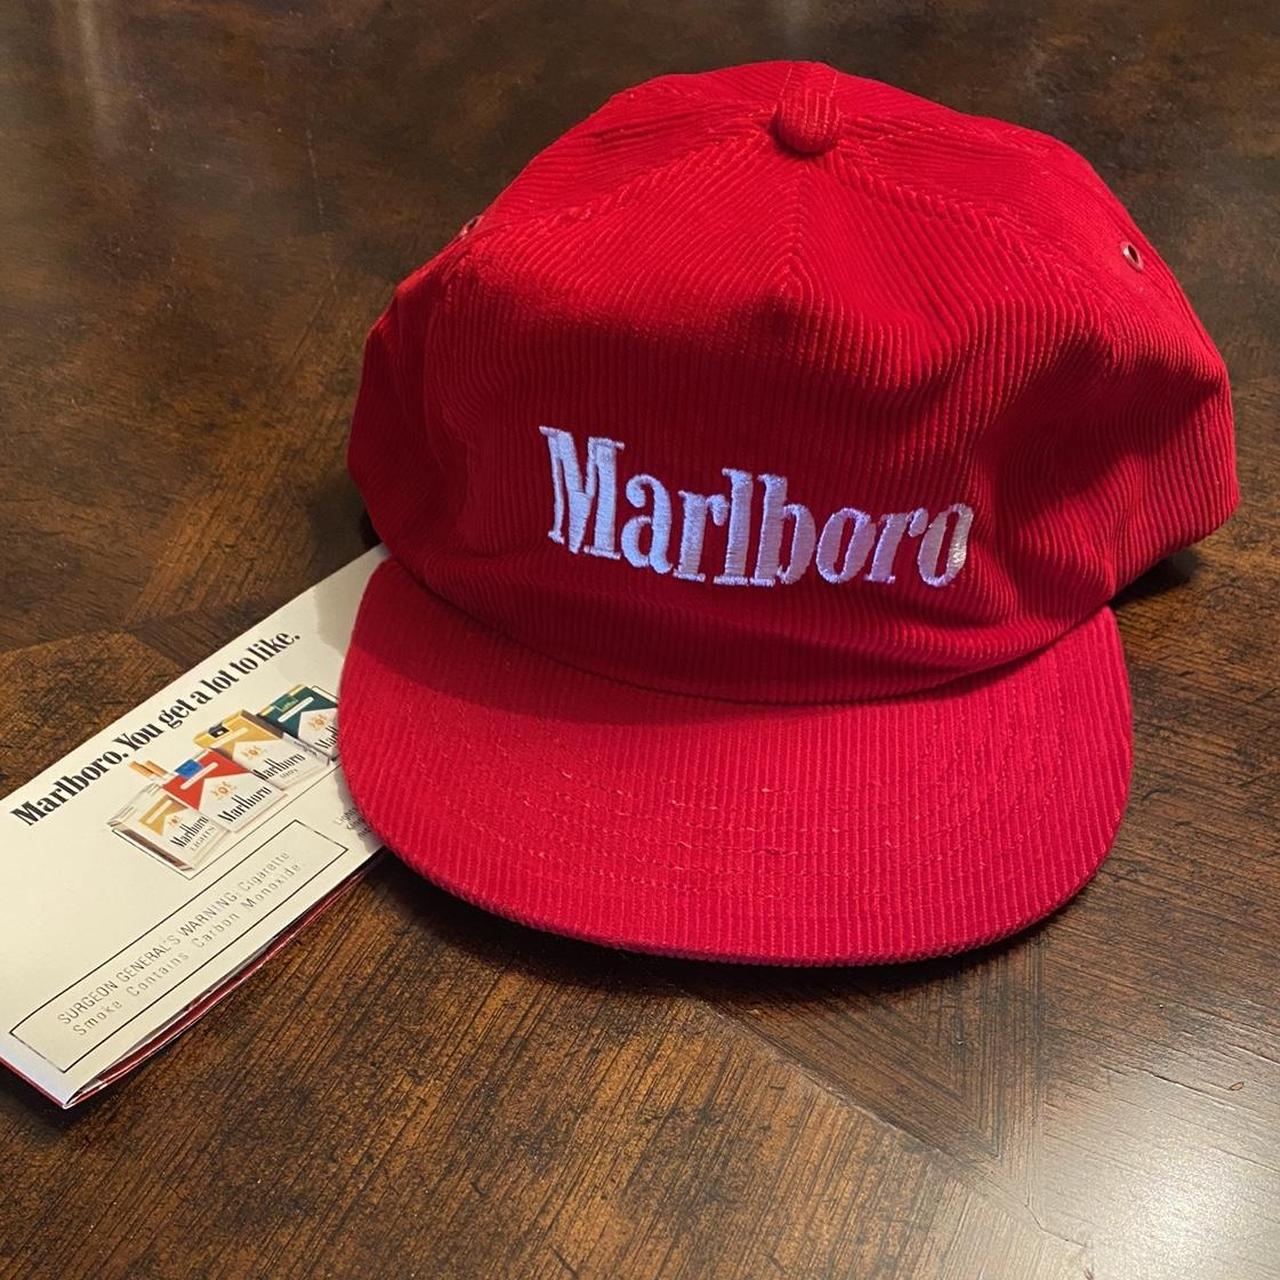 Brand new Marlboro red corduroy hat from 1985. The